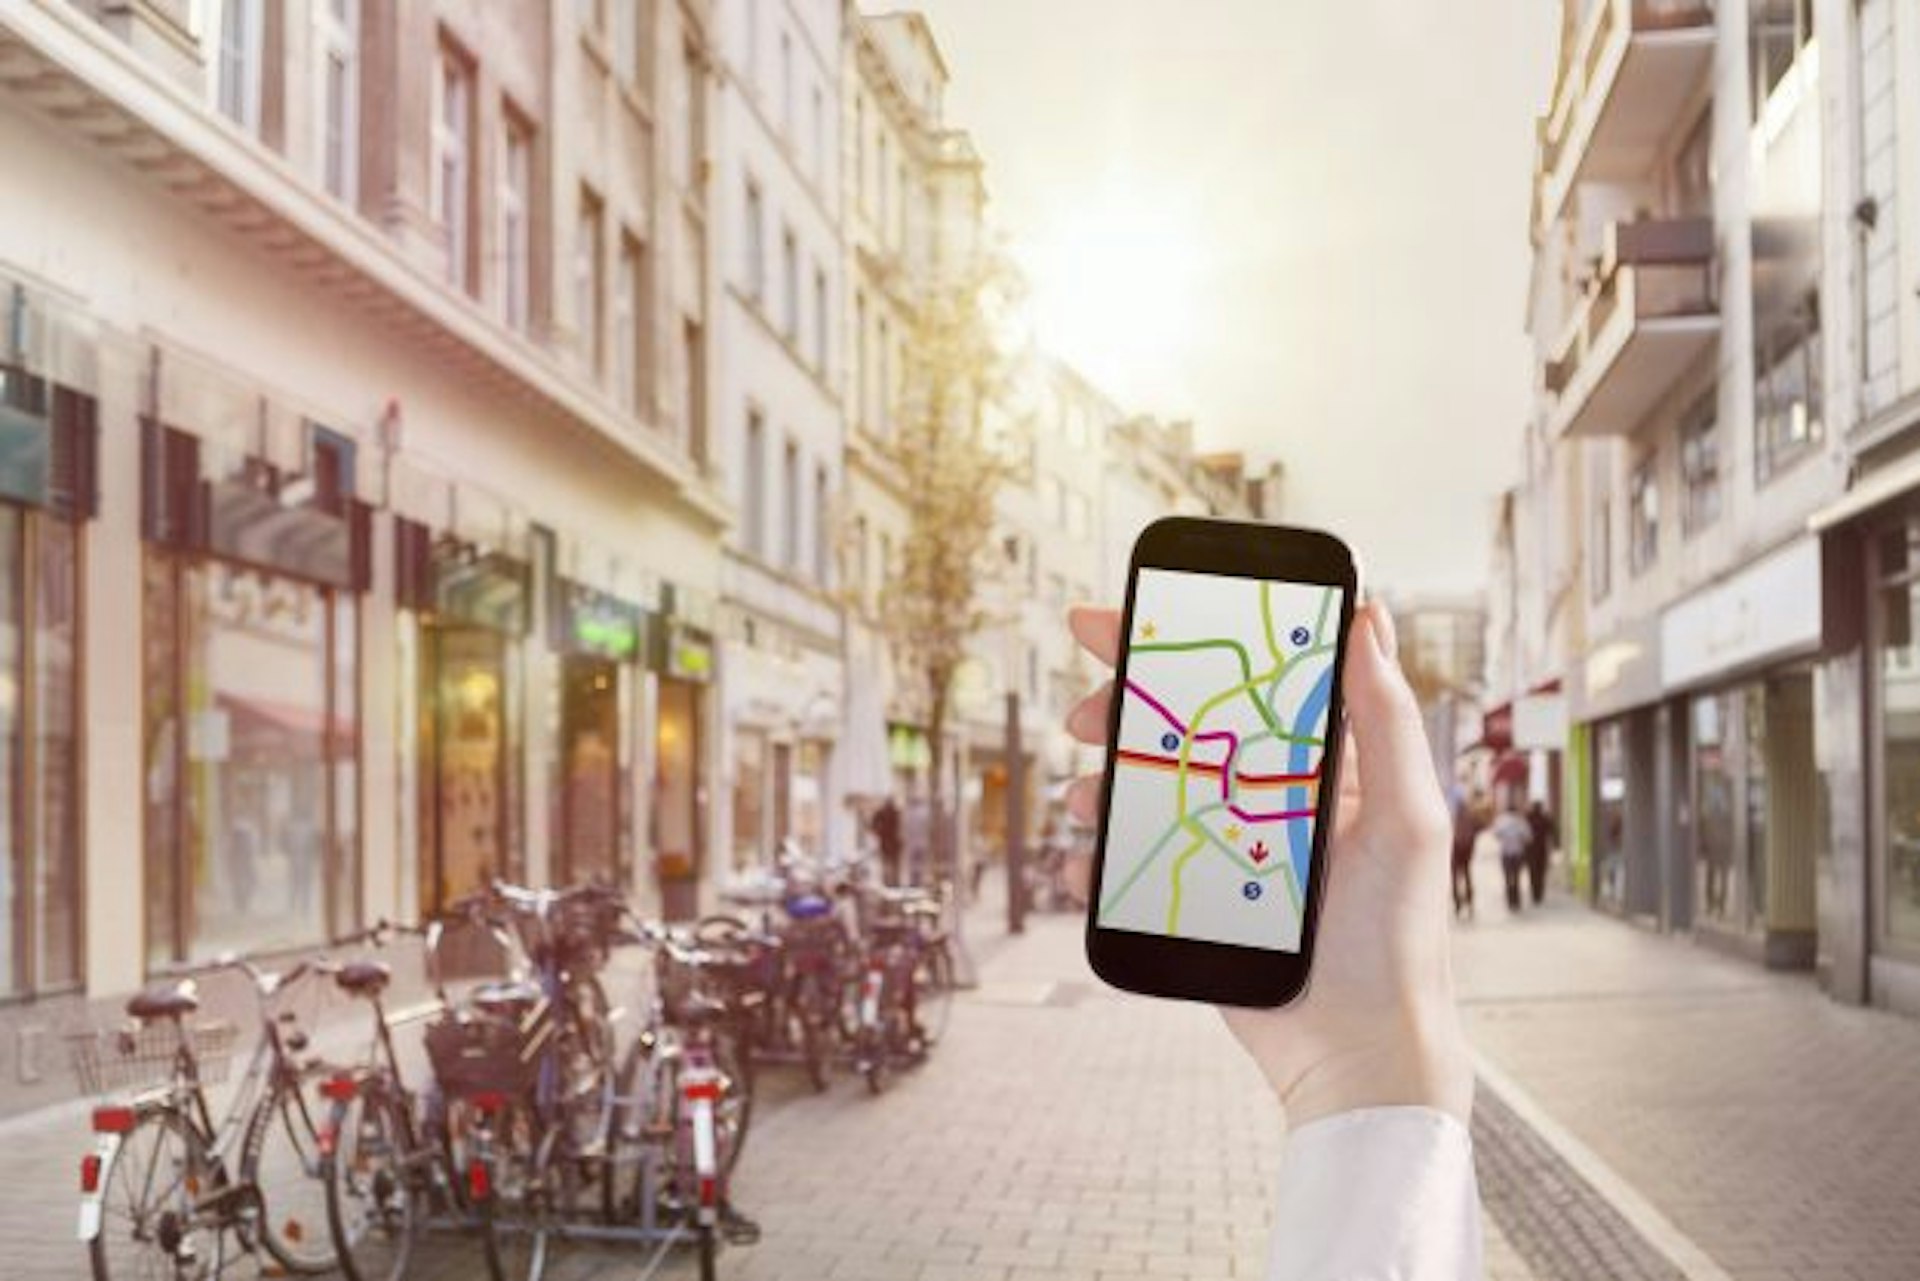 Travel News - Hand holding smart phone with map app in city